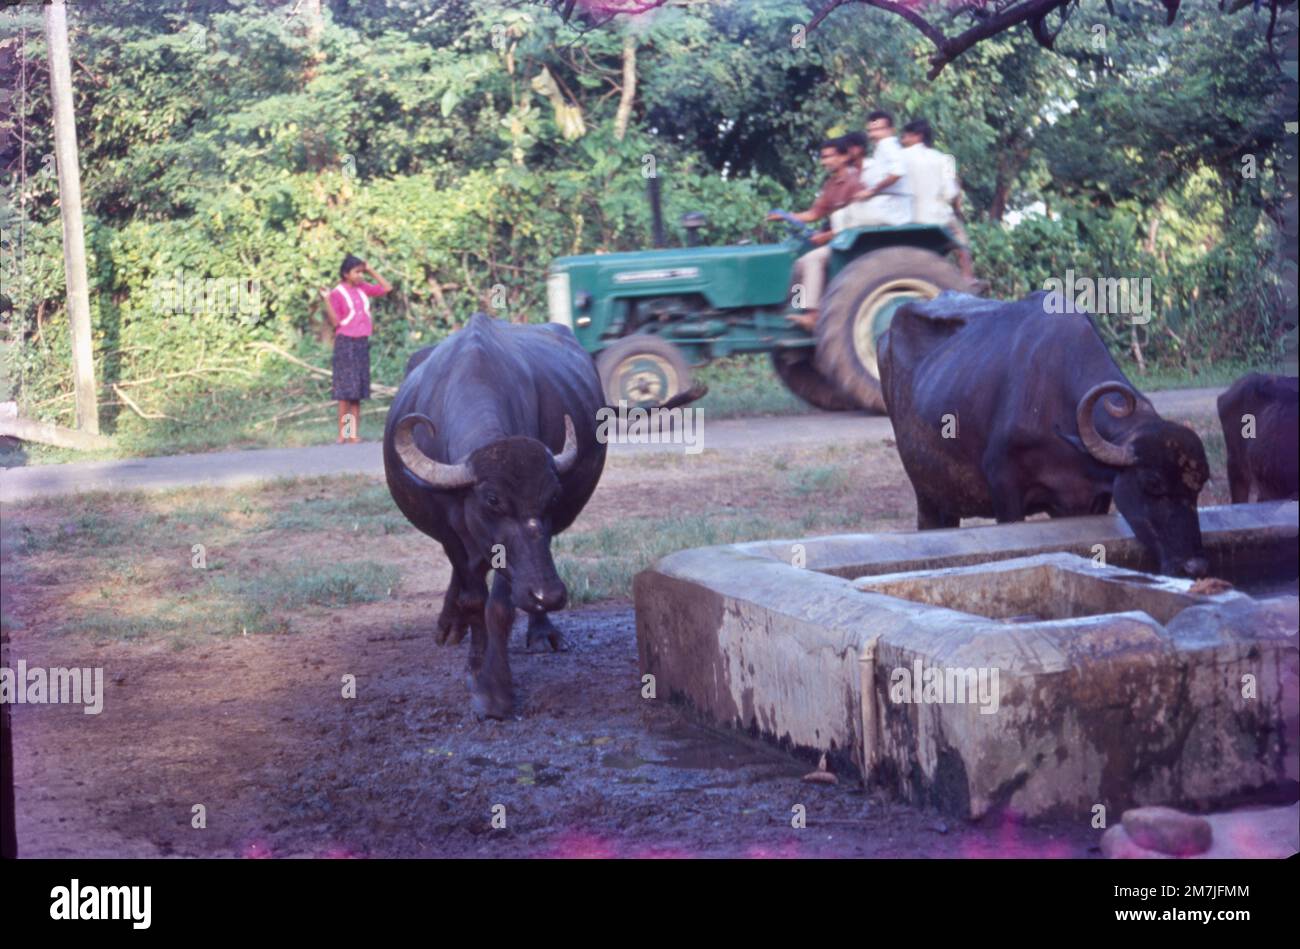 Cattles Going to Drink Water in Gujrat Village, India Stock Photo